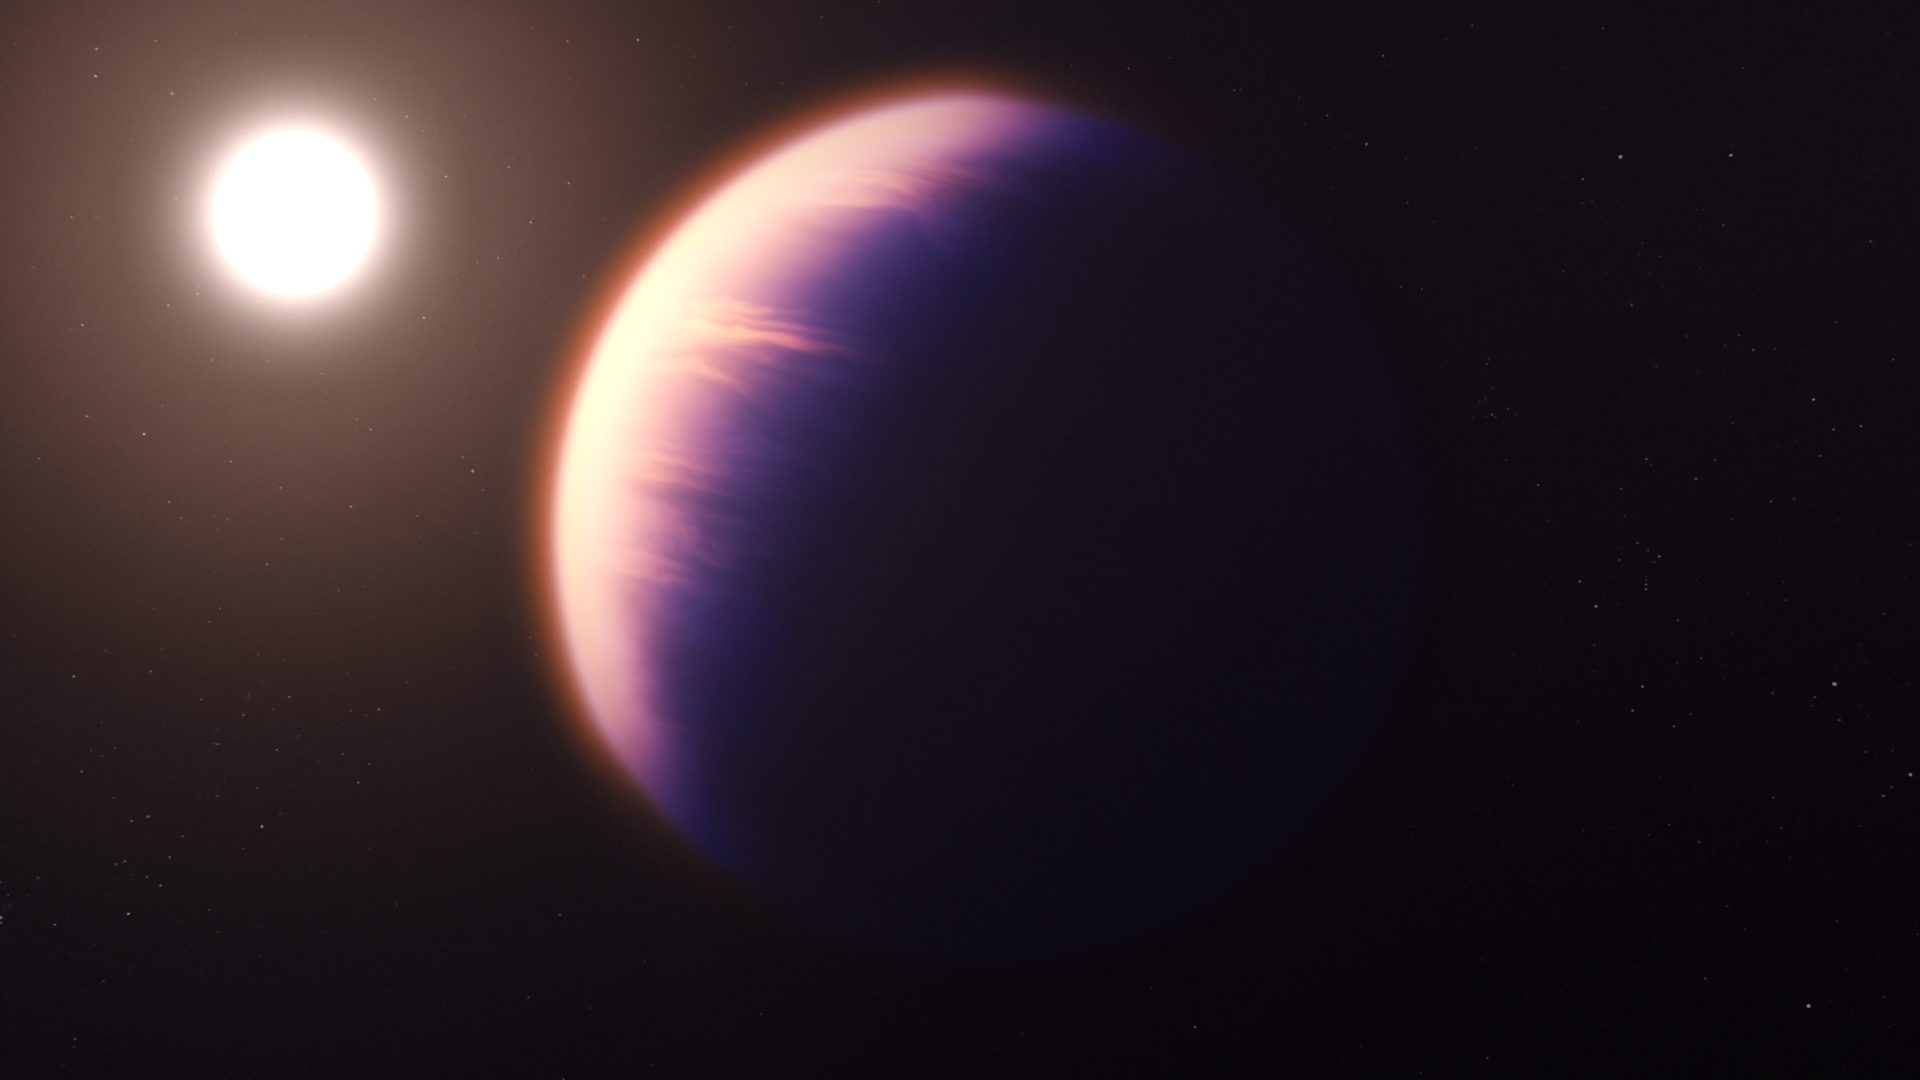 Exoplanet in space next to star